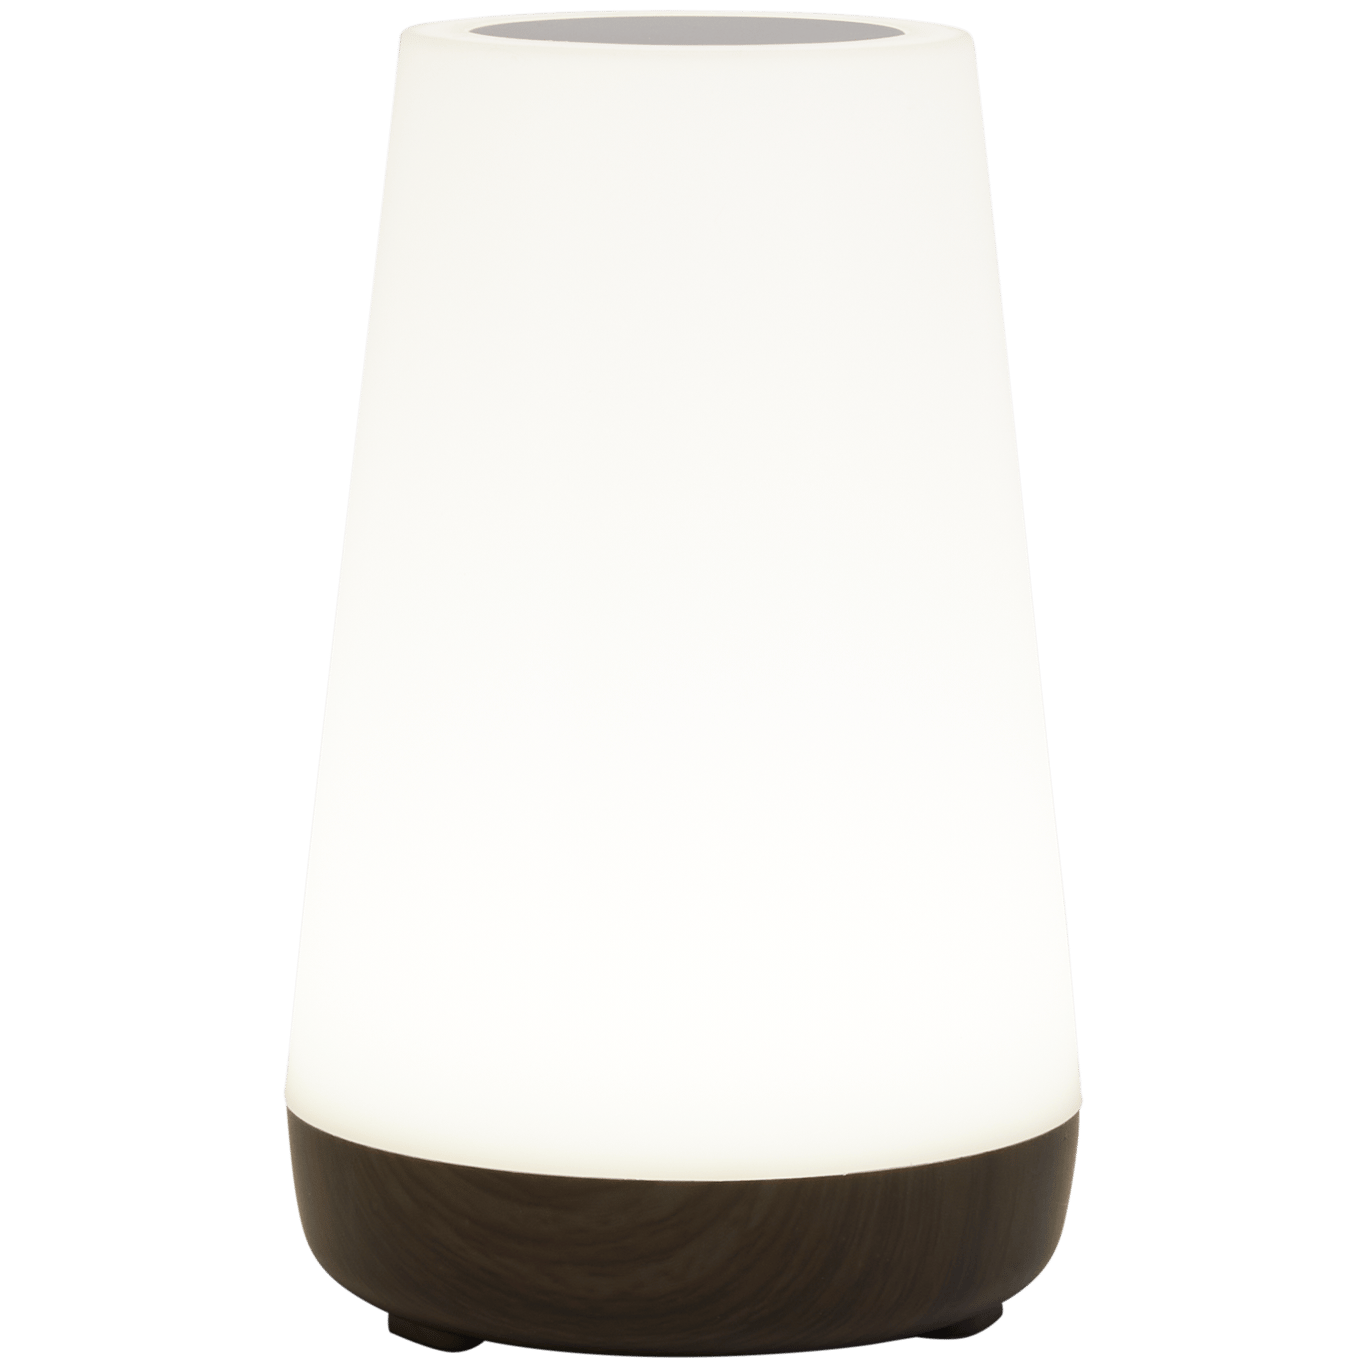 Deluxa touch lamp